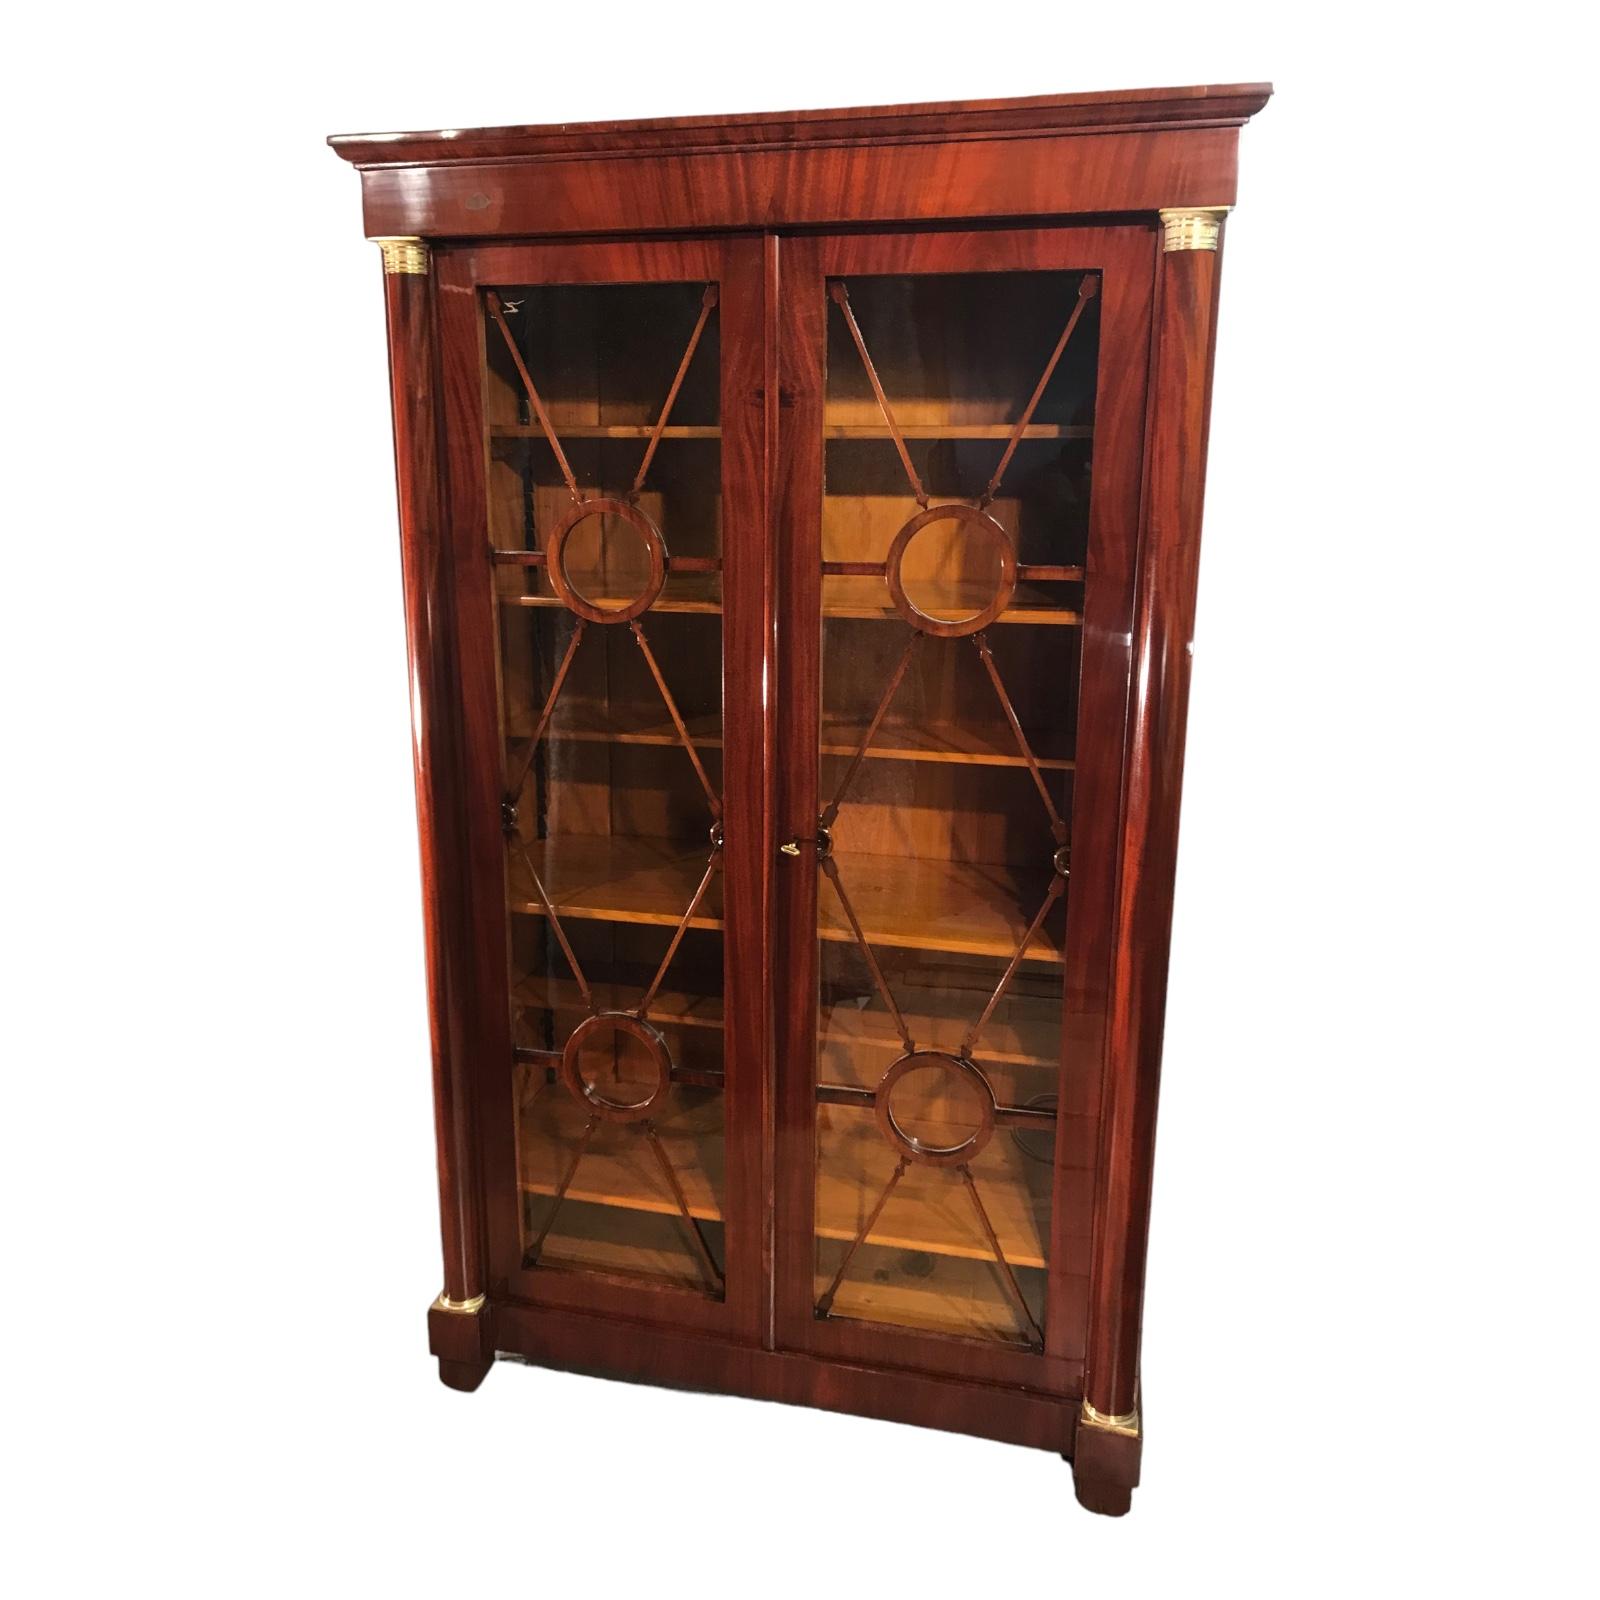 This unique antique Biedermeier library cabinet dates back to the early Biedermeier period 1810-20 and comes from Germany. It features a walnut and mahogany veneer on softwood. The two doors are framed by columns with their original brass capitals